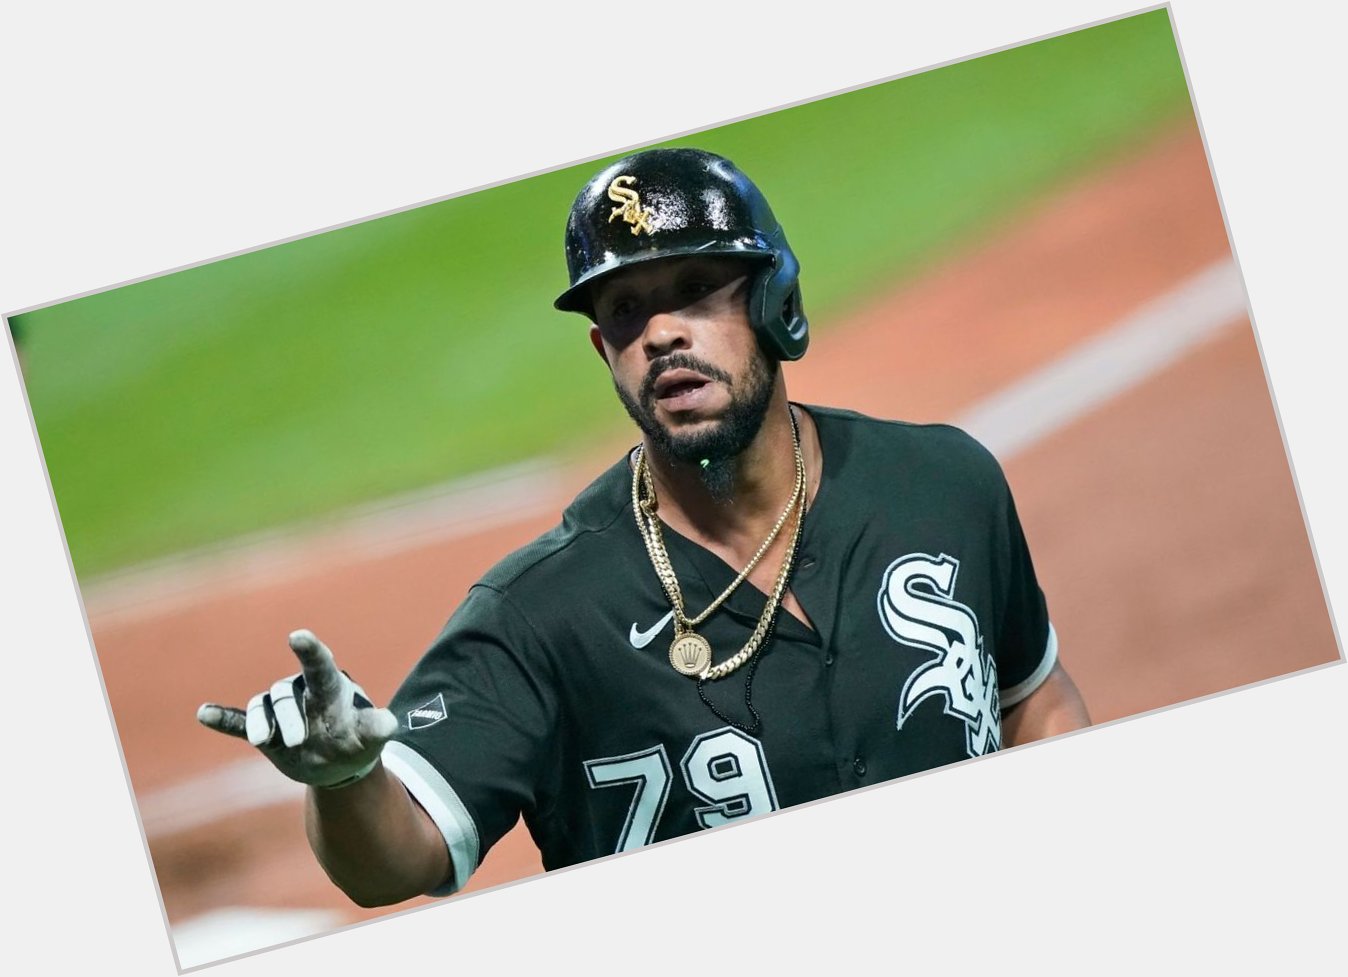 Happy birthday Jose Abreu! Where does the White Sox 1B rank among ALL first basemen in the Majors? 